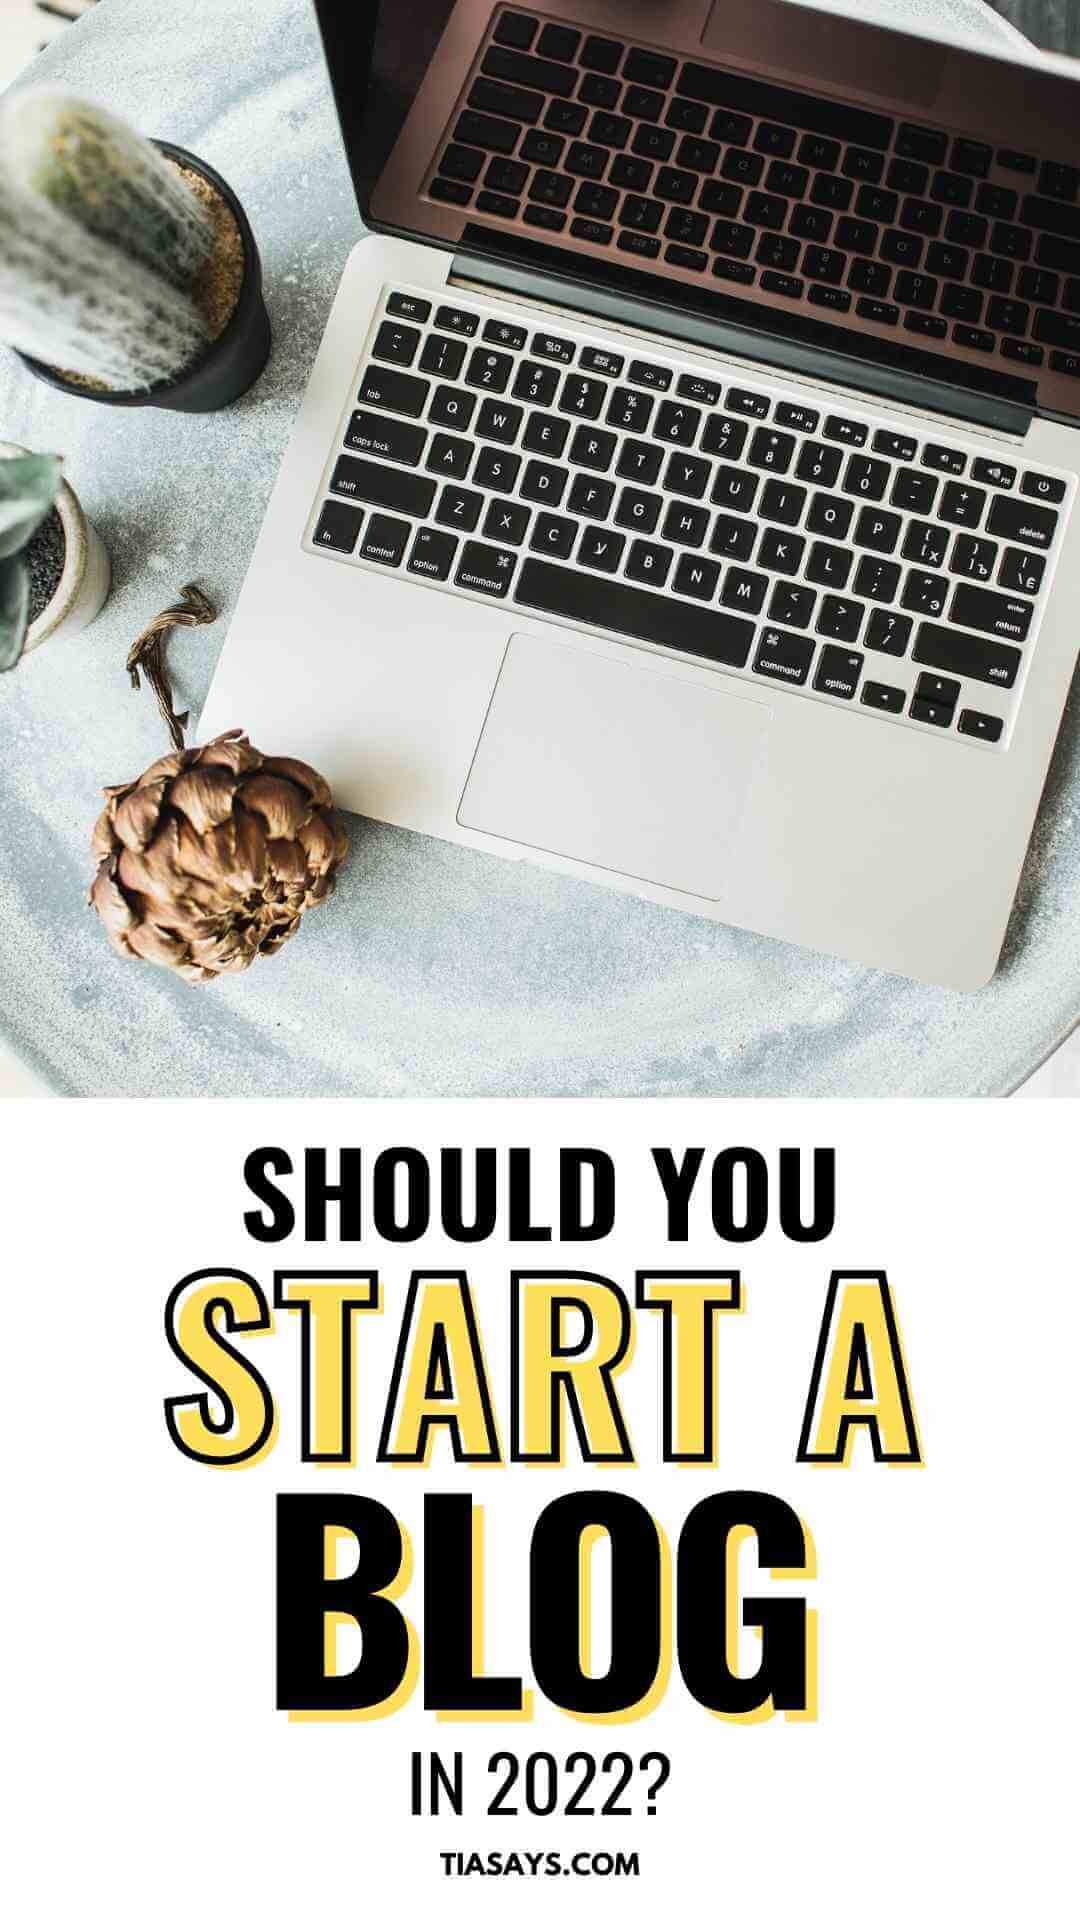 should you start a blog in 2022?